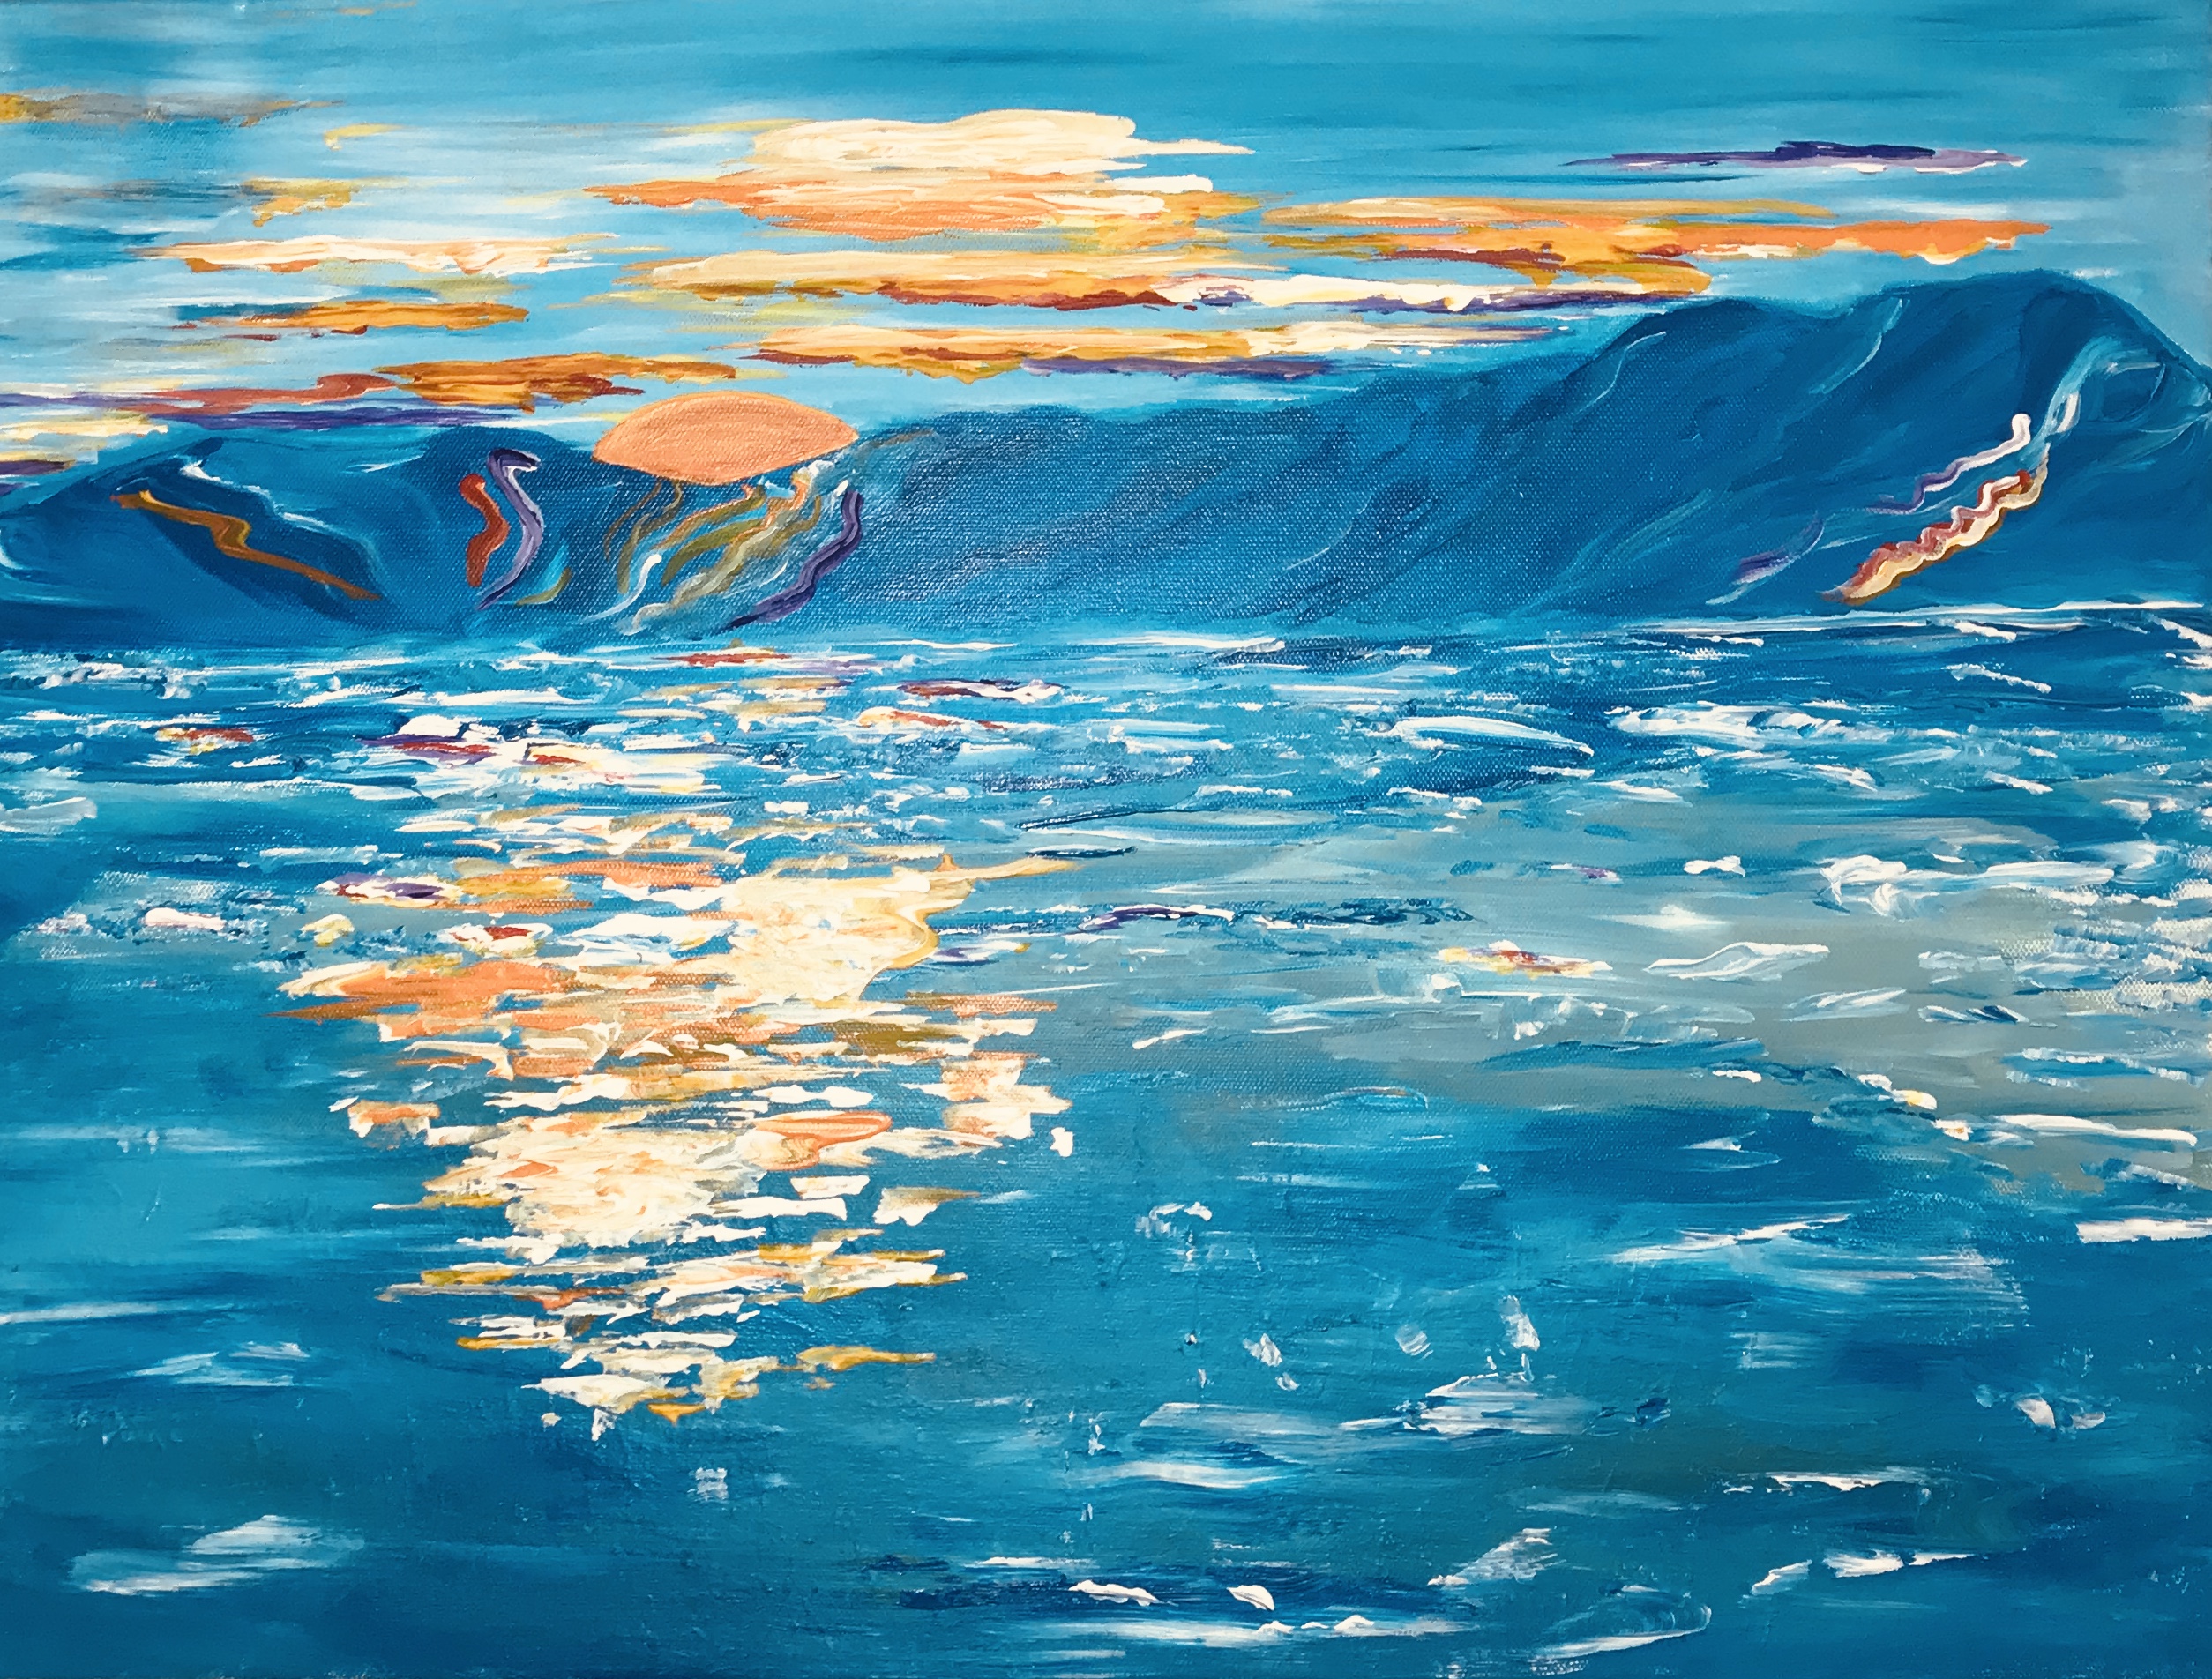 acrylic painting of sunset with mountains in shade, colorful skies, and sunlight reflections on the waters at Kachemak Bay, Alaska, by Maria Ekstrand